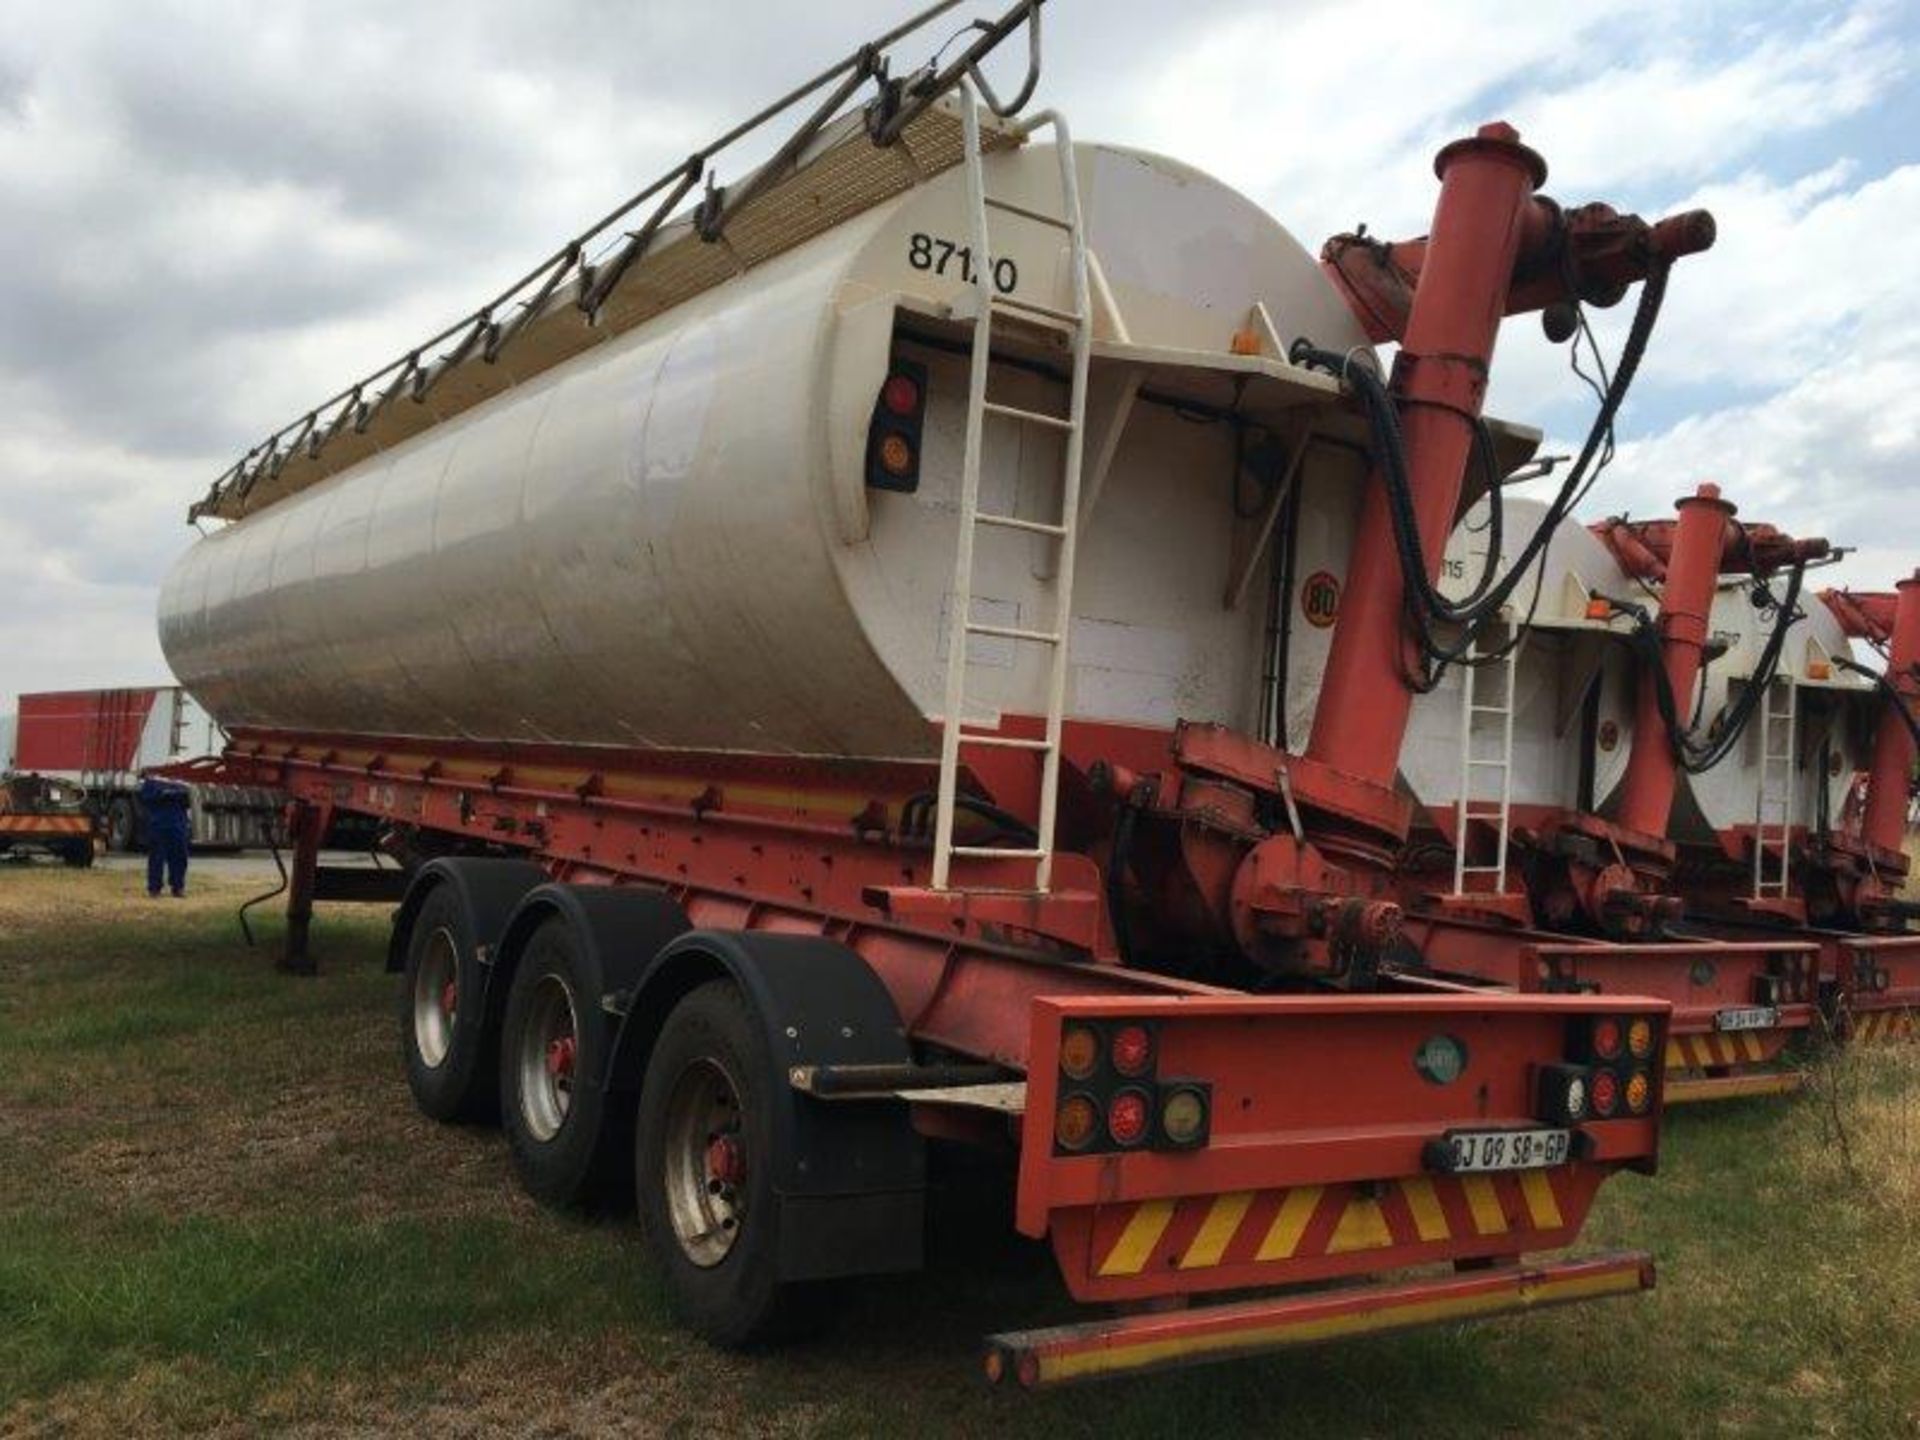 2011 GRW TRI-AXLE AUGER BULK TANKER TRAILER BJ09SBGP - (87120) - Subject to Confirmation - Image 3 of 5